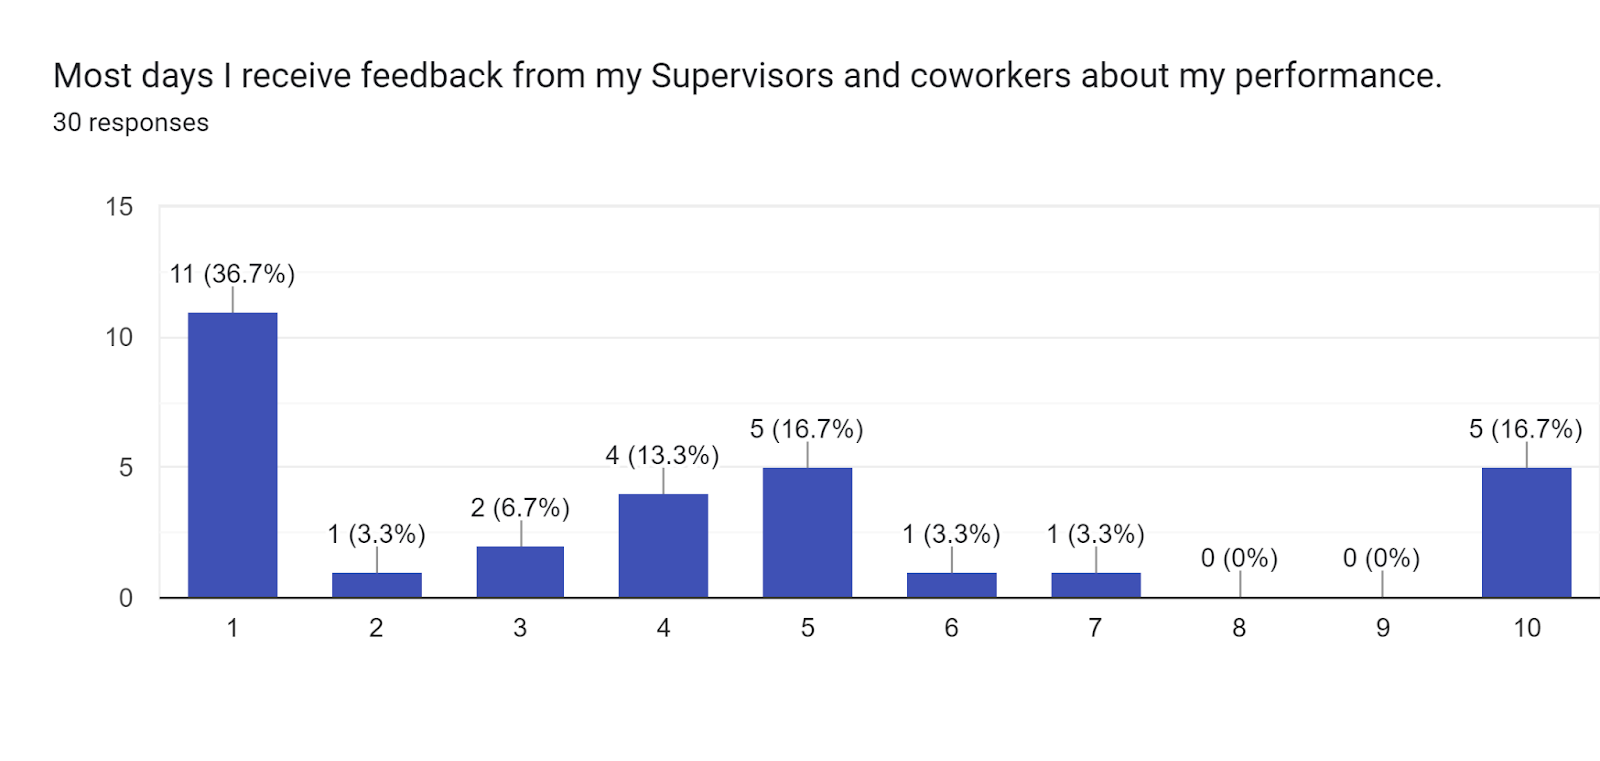 Forms response chart. Question title: Most days I receive feedback from my Supervisors and coworkers about my performance.. Number of responses: 30 responses.